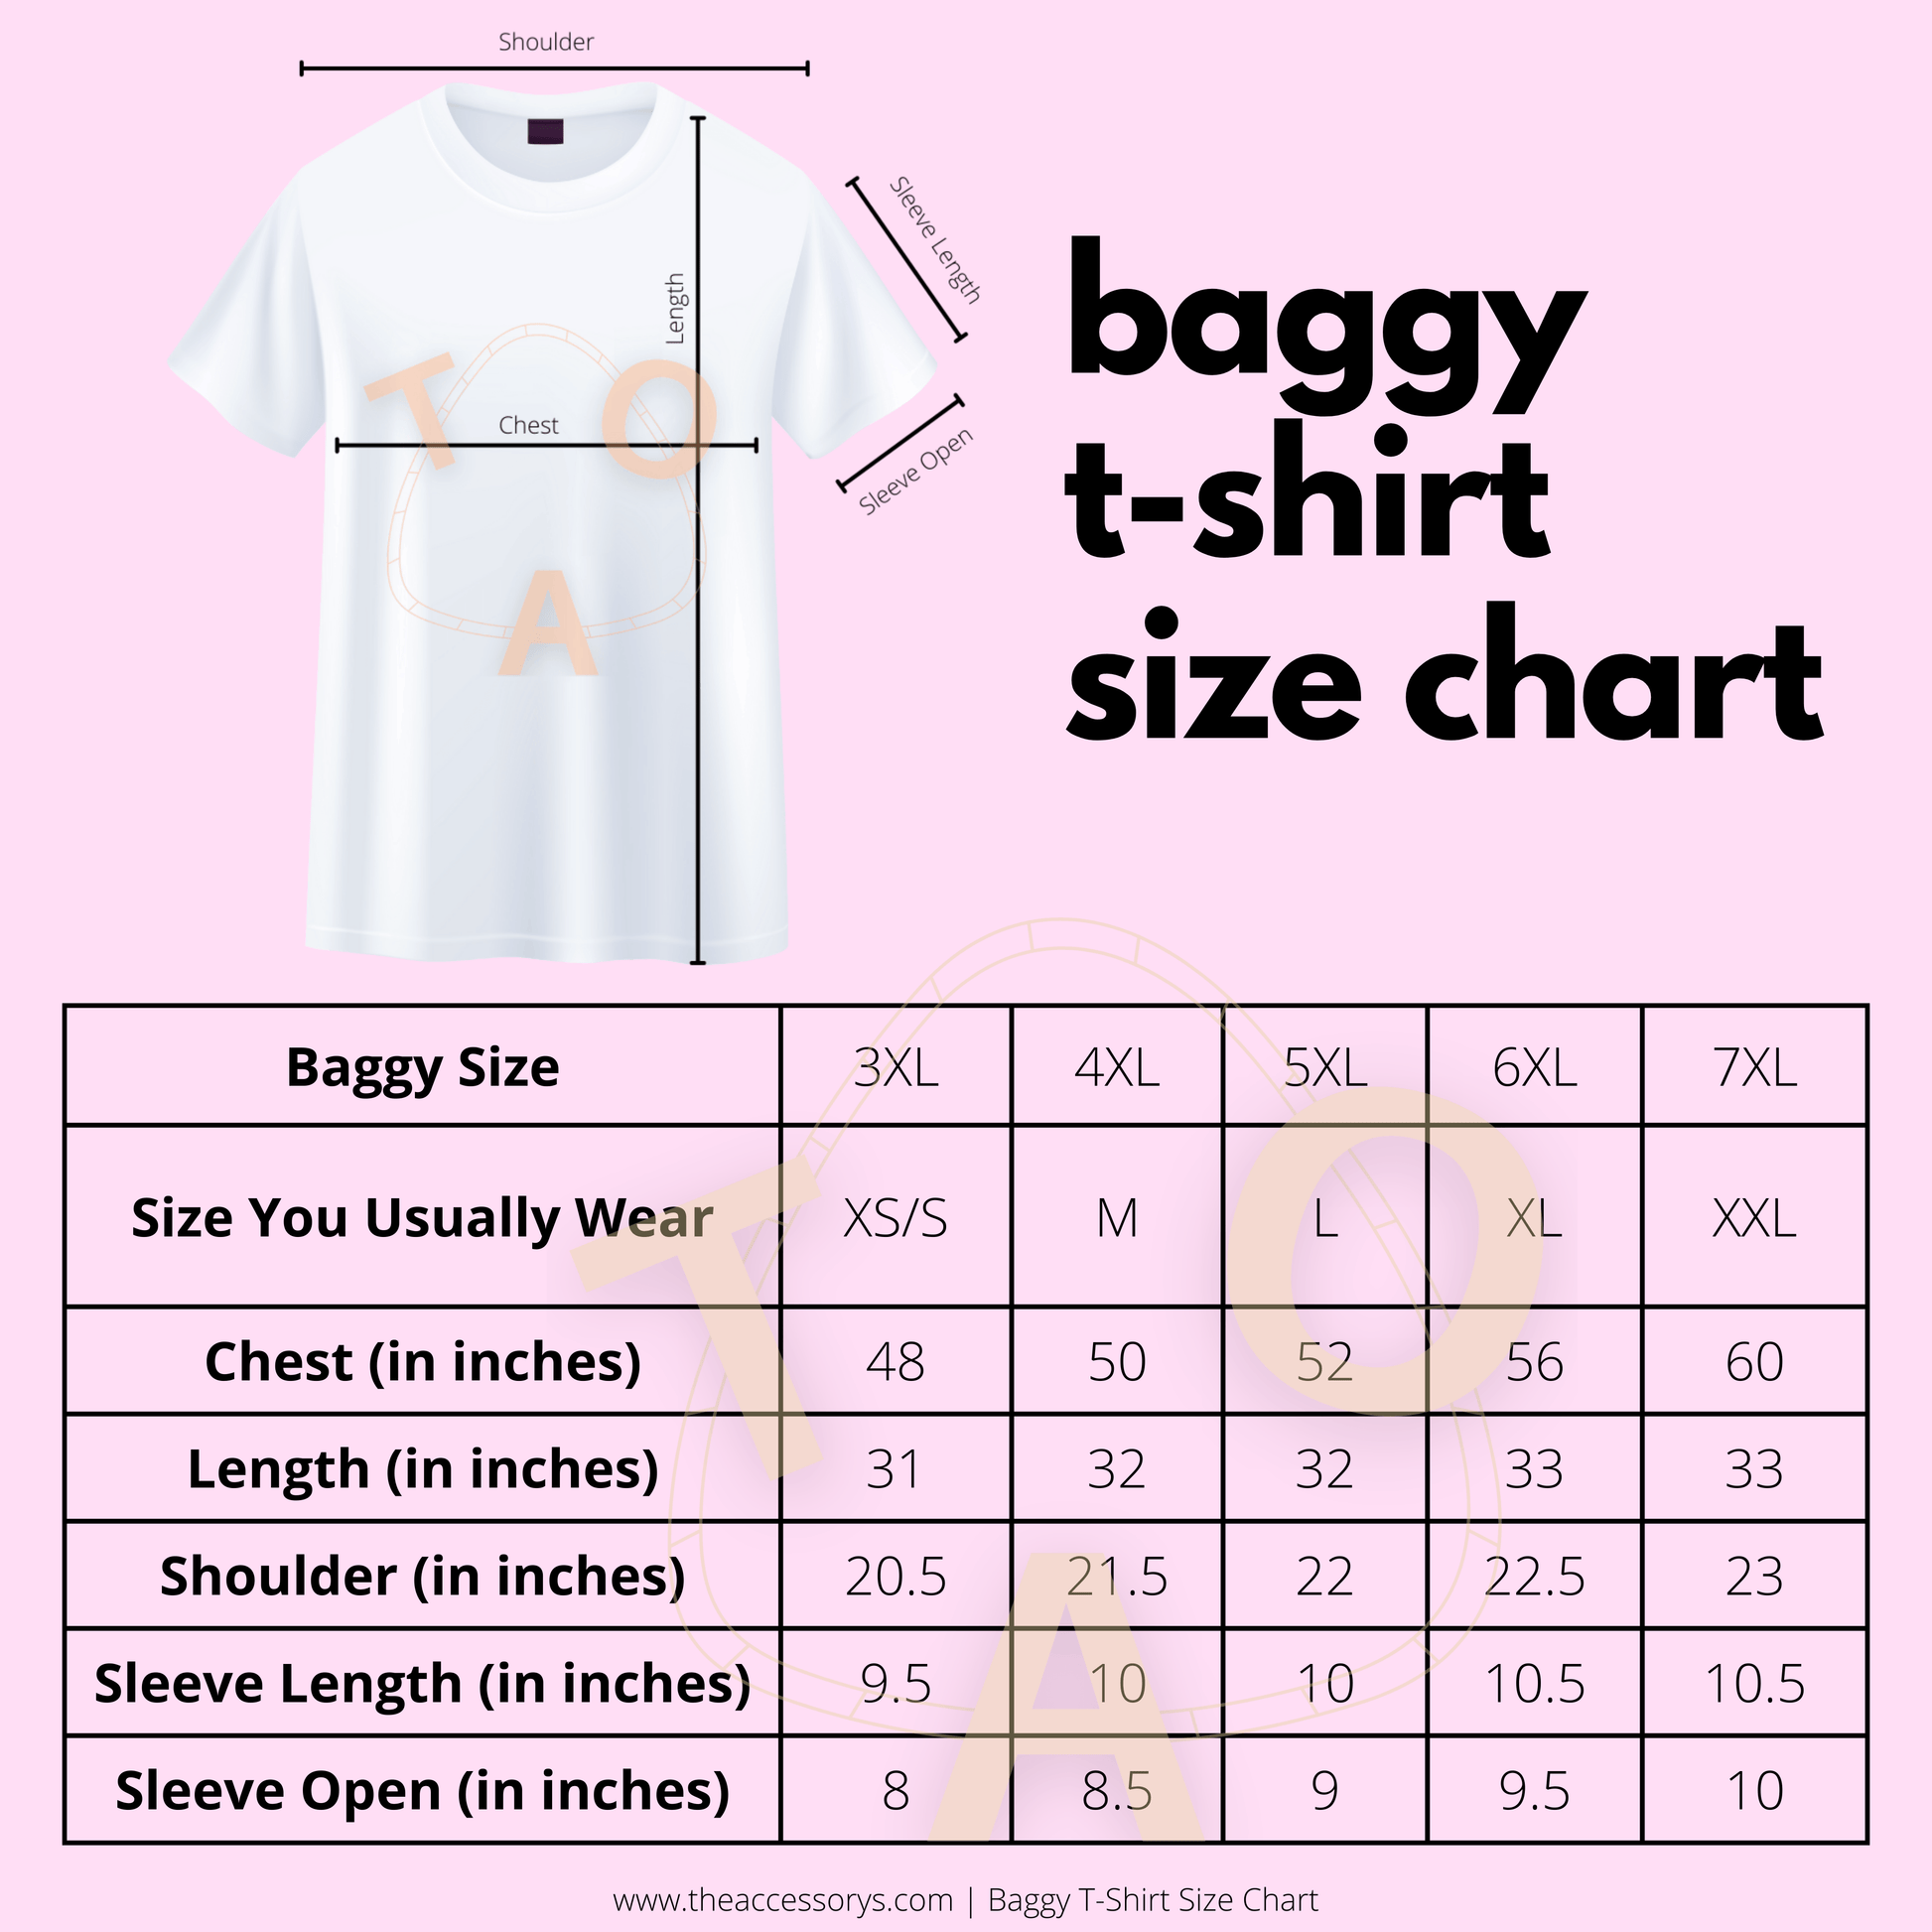 Juicy Jems Baggy T-Shirt - The Accessorys Official